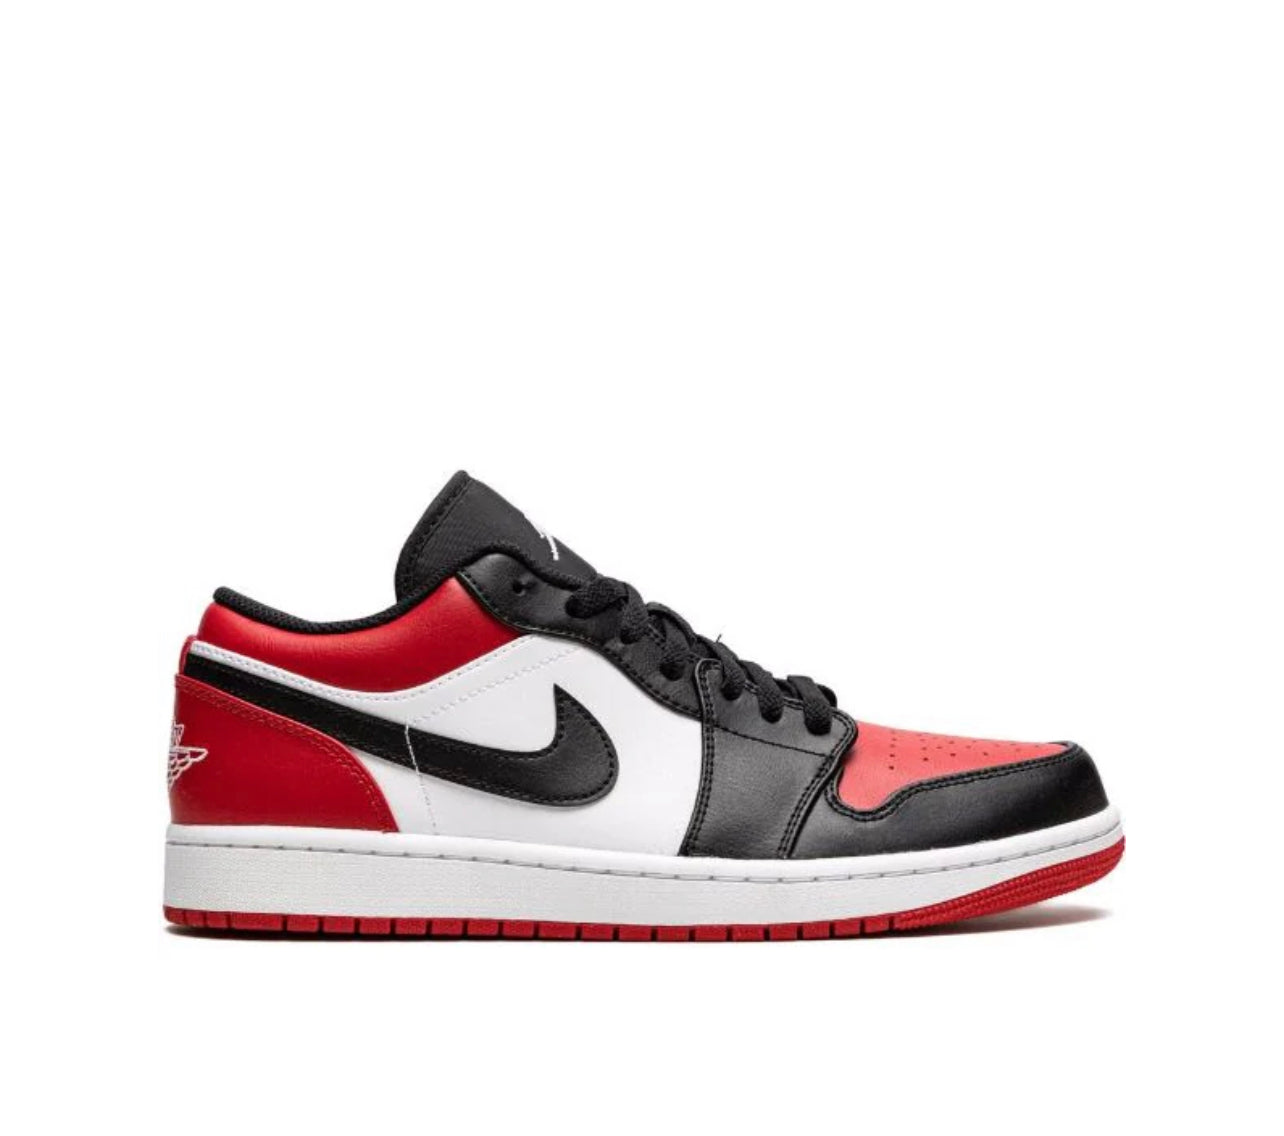 Air 1 Low Bred Toe Goya Outlet